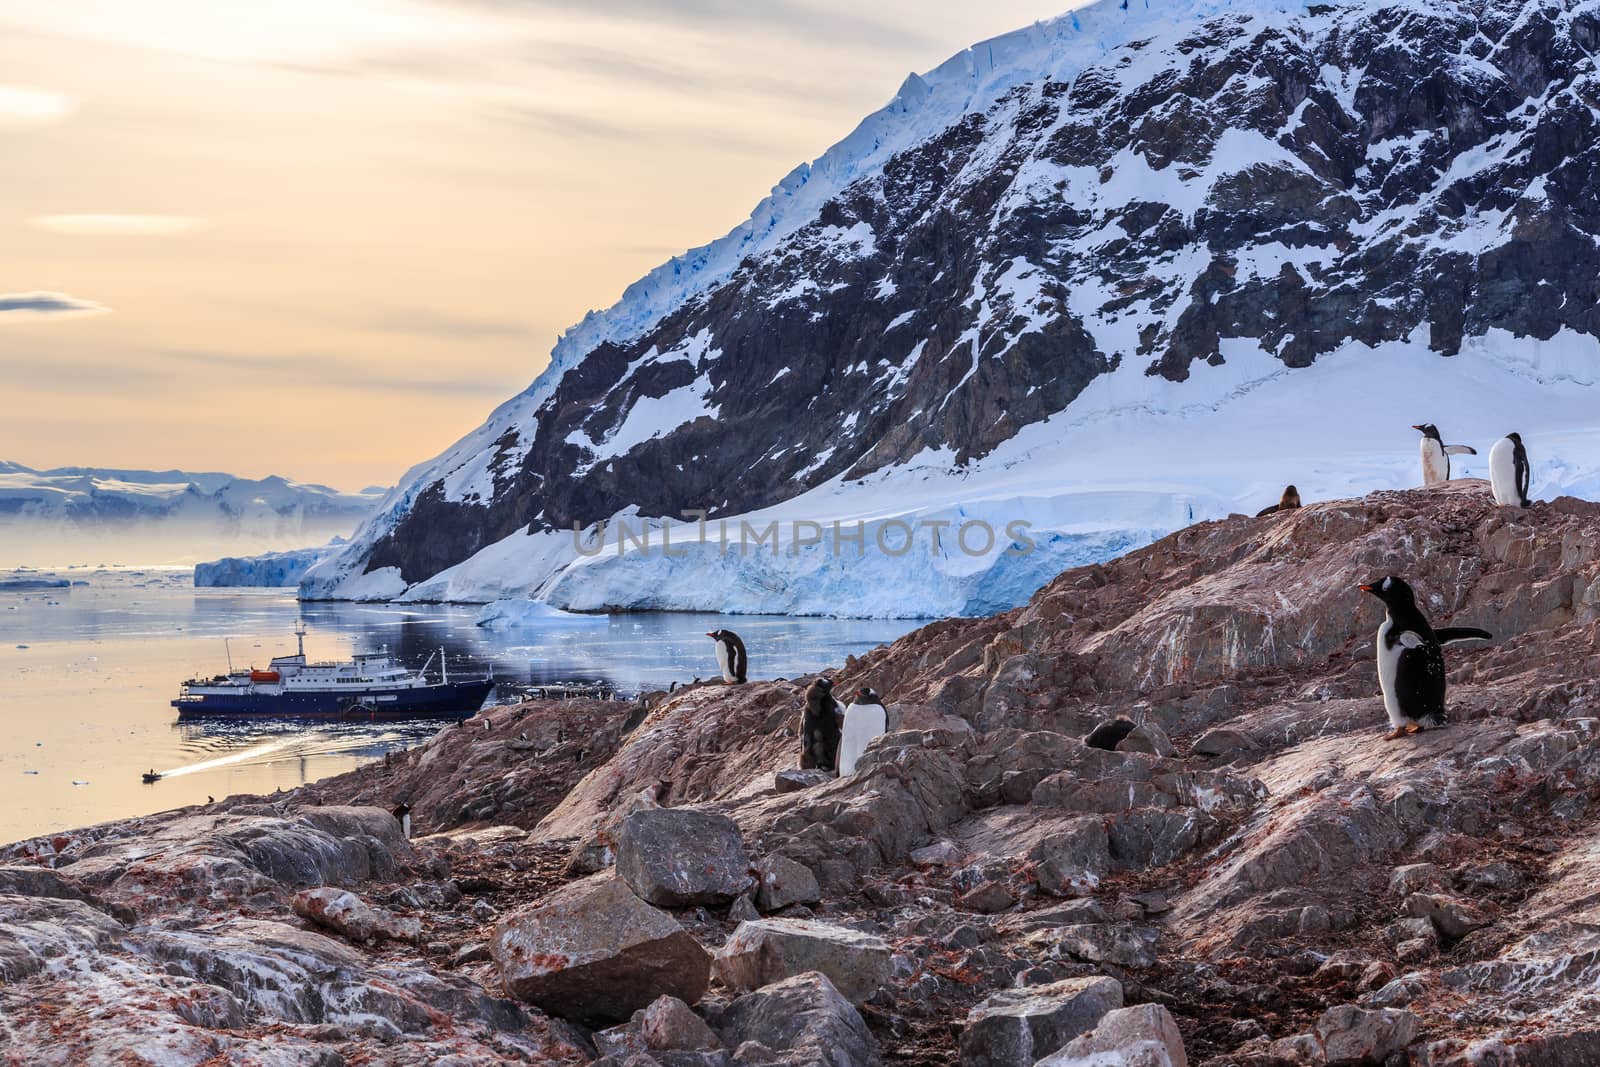 Gentoo penguins gathered on the rocky shore of Neco bay and cruise ship int the bakground, Antarctica